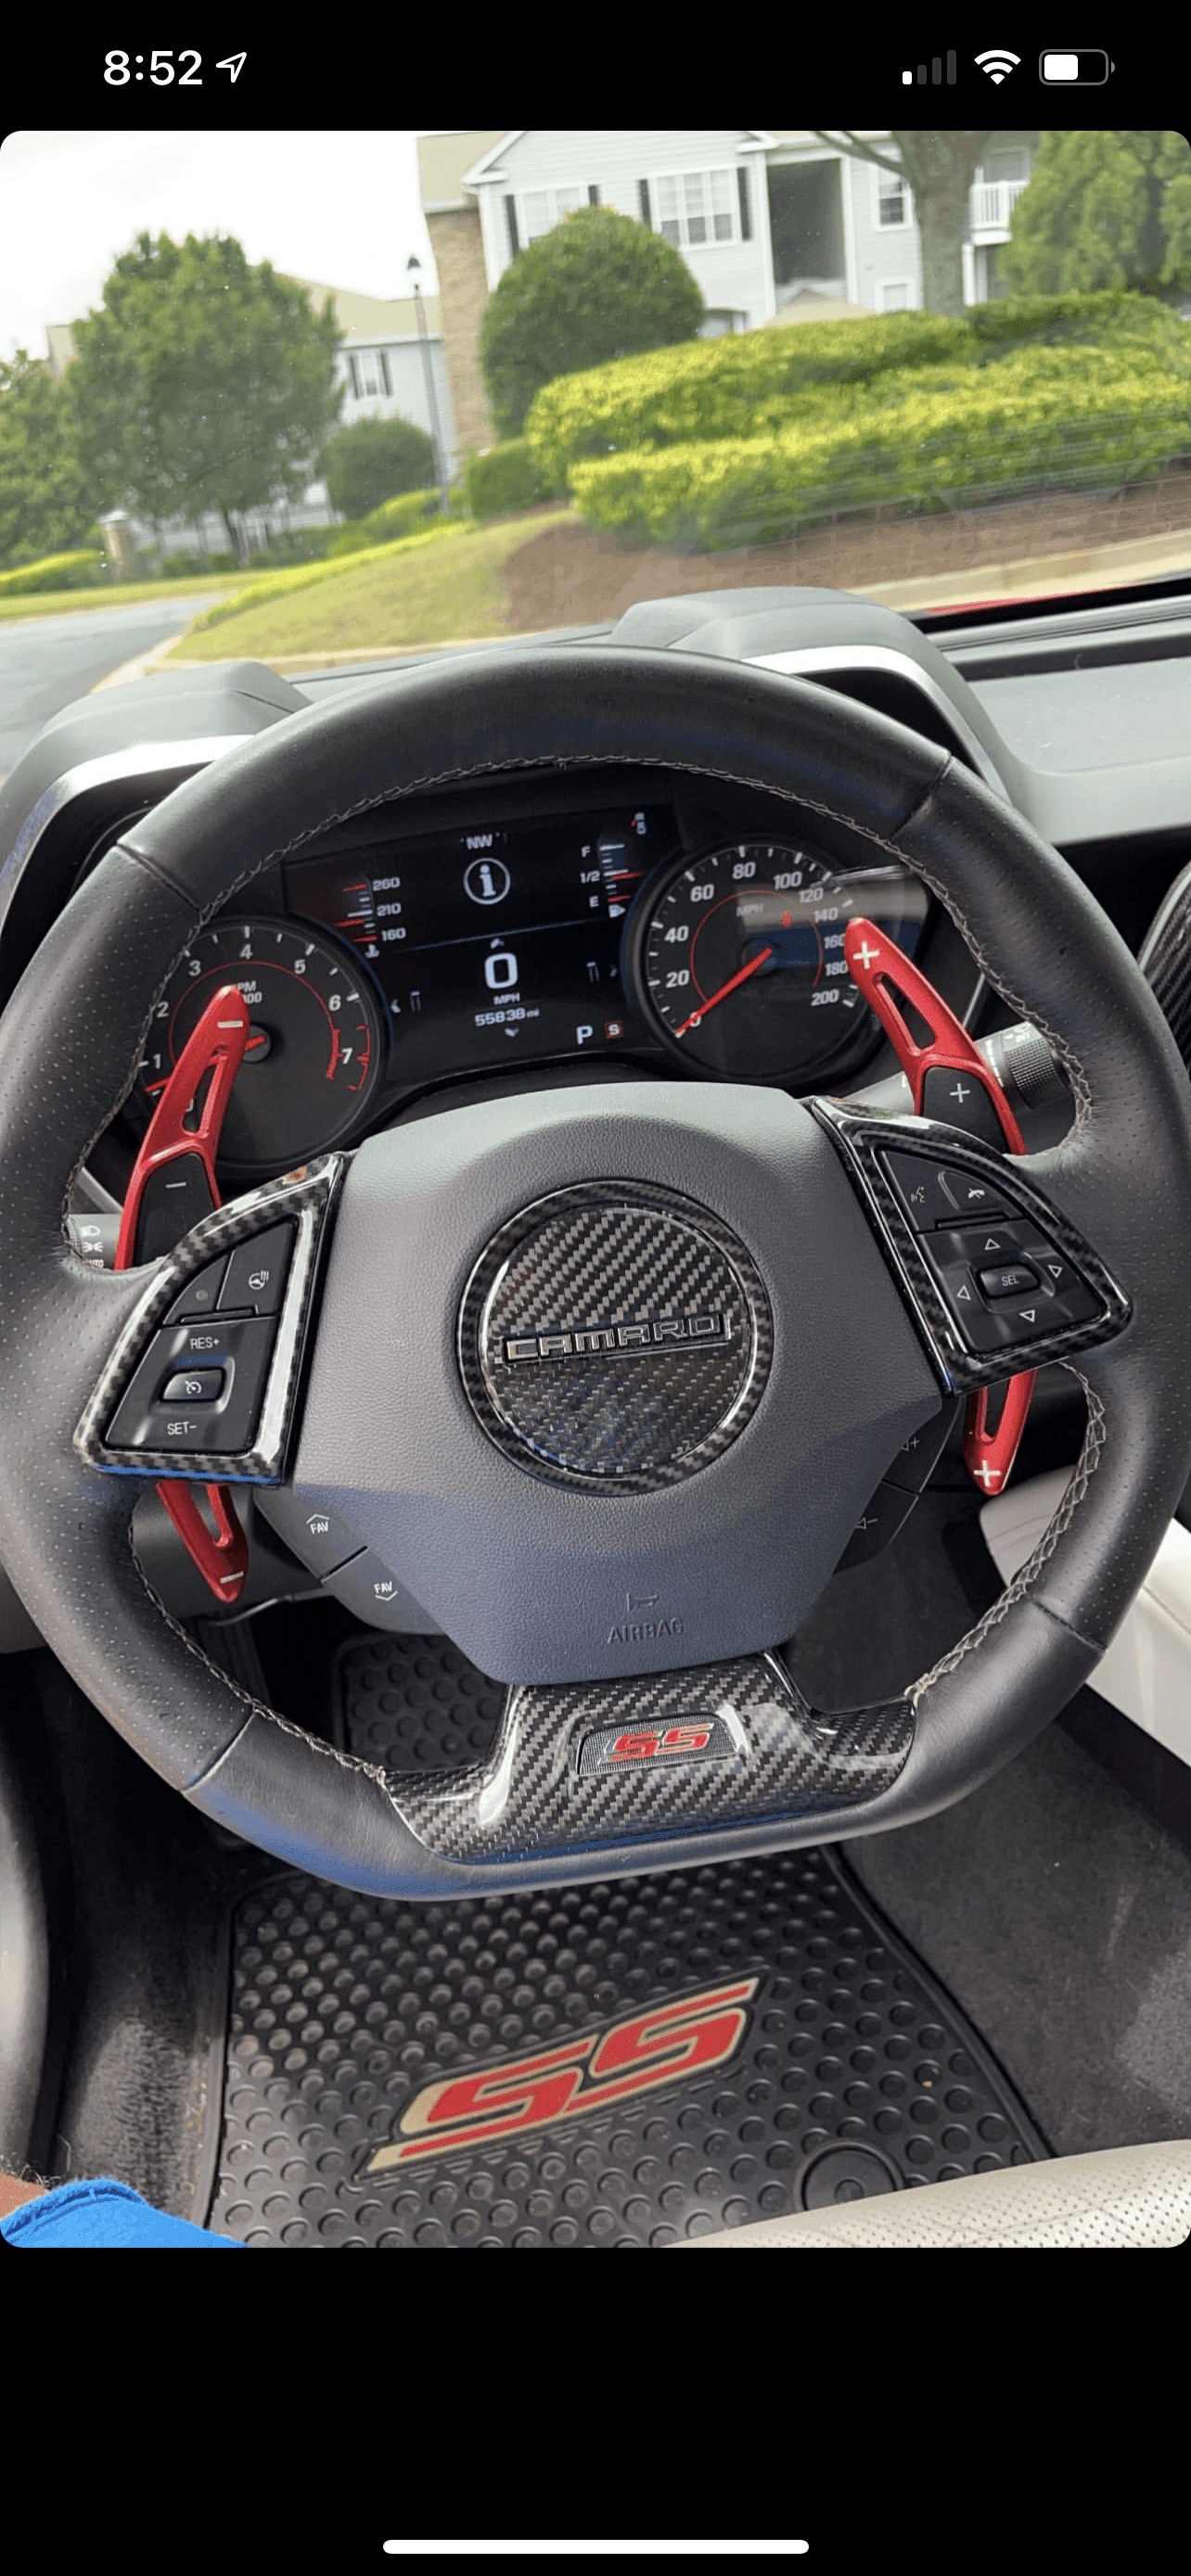 2016-2024 Camaro Steering Wheel and Airbag Chrome Delete Covers - carbonaddons Carbon Fiber Parts, Accessories, Upgrades, Mods